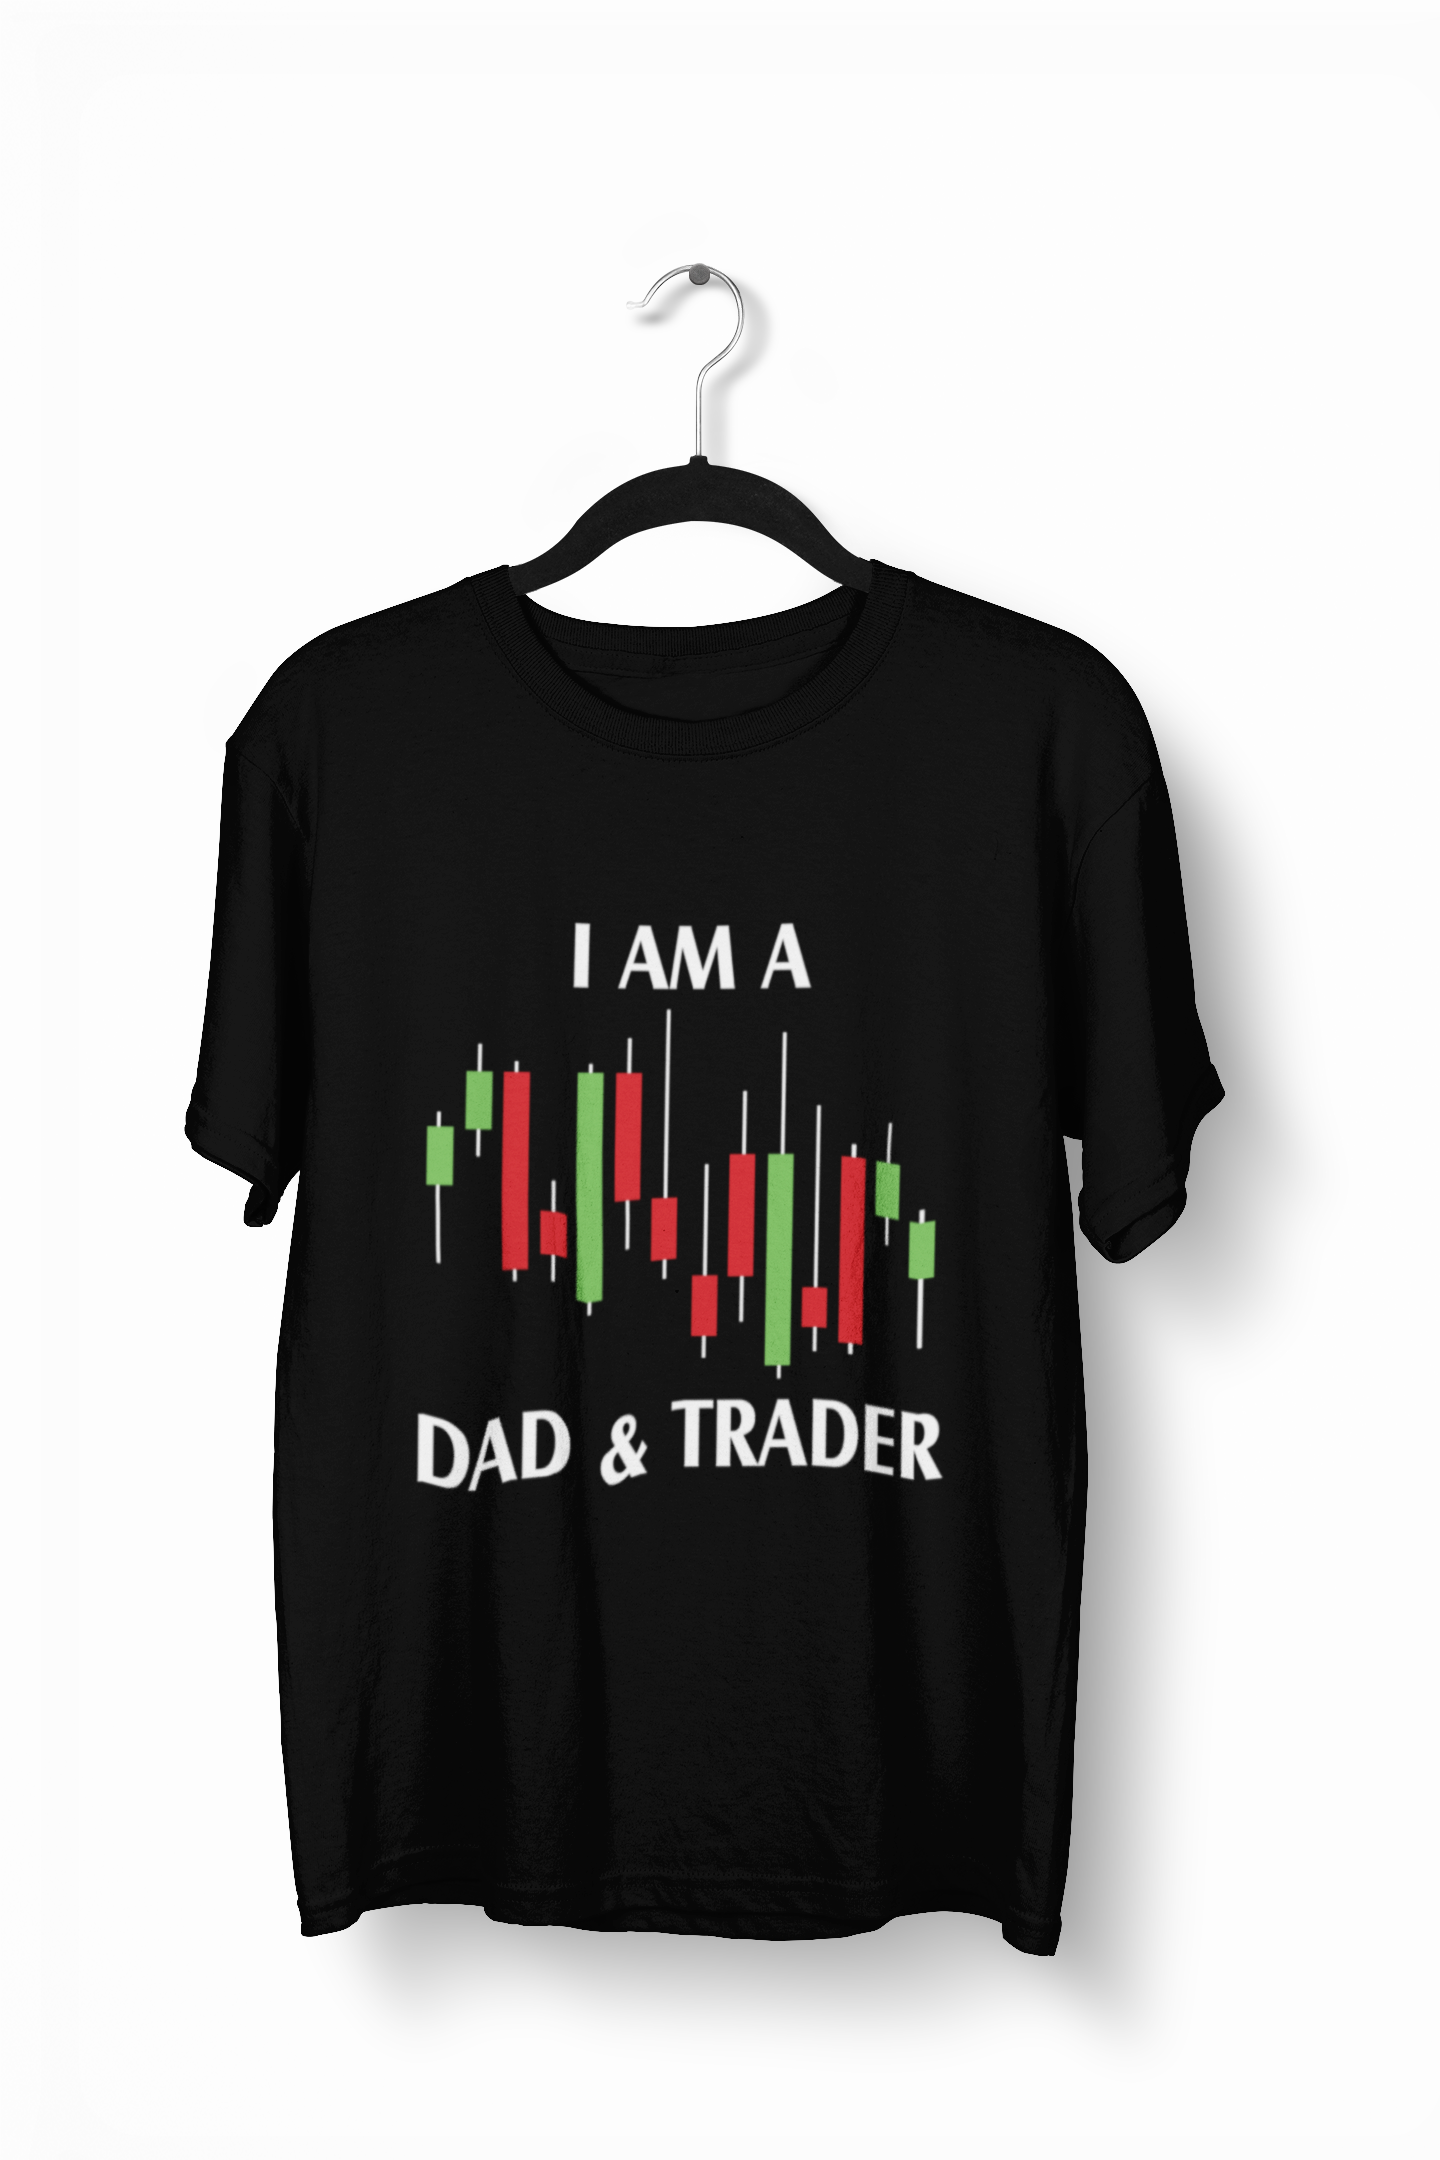 Gift For Trader, I Am a Dad and Trader T-Shirt - Express Your Love Gifts